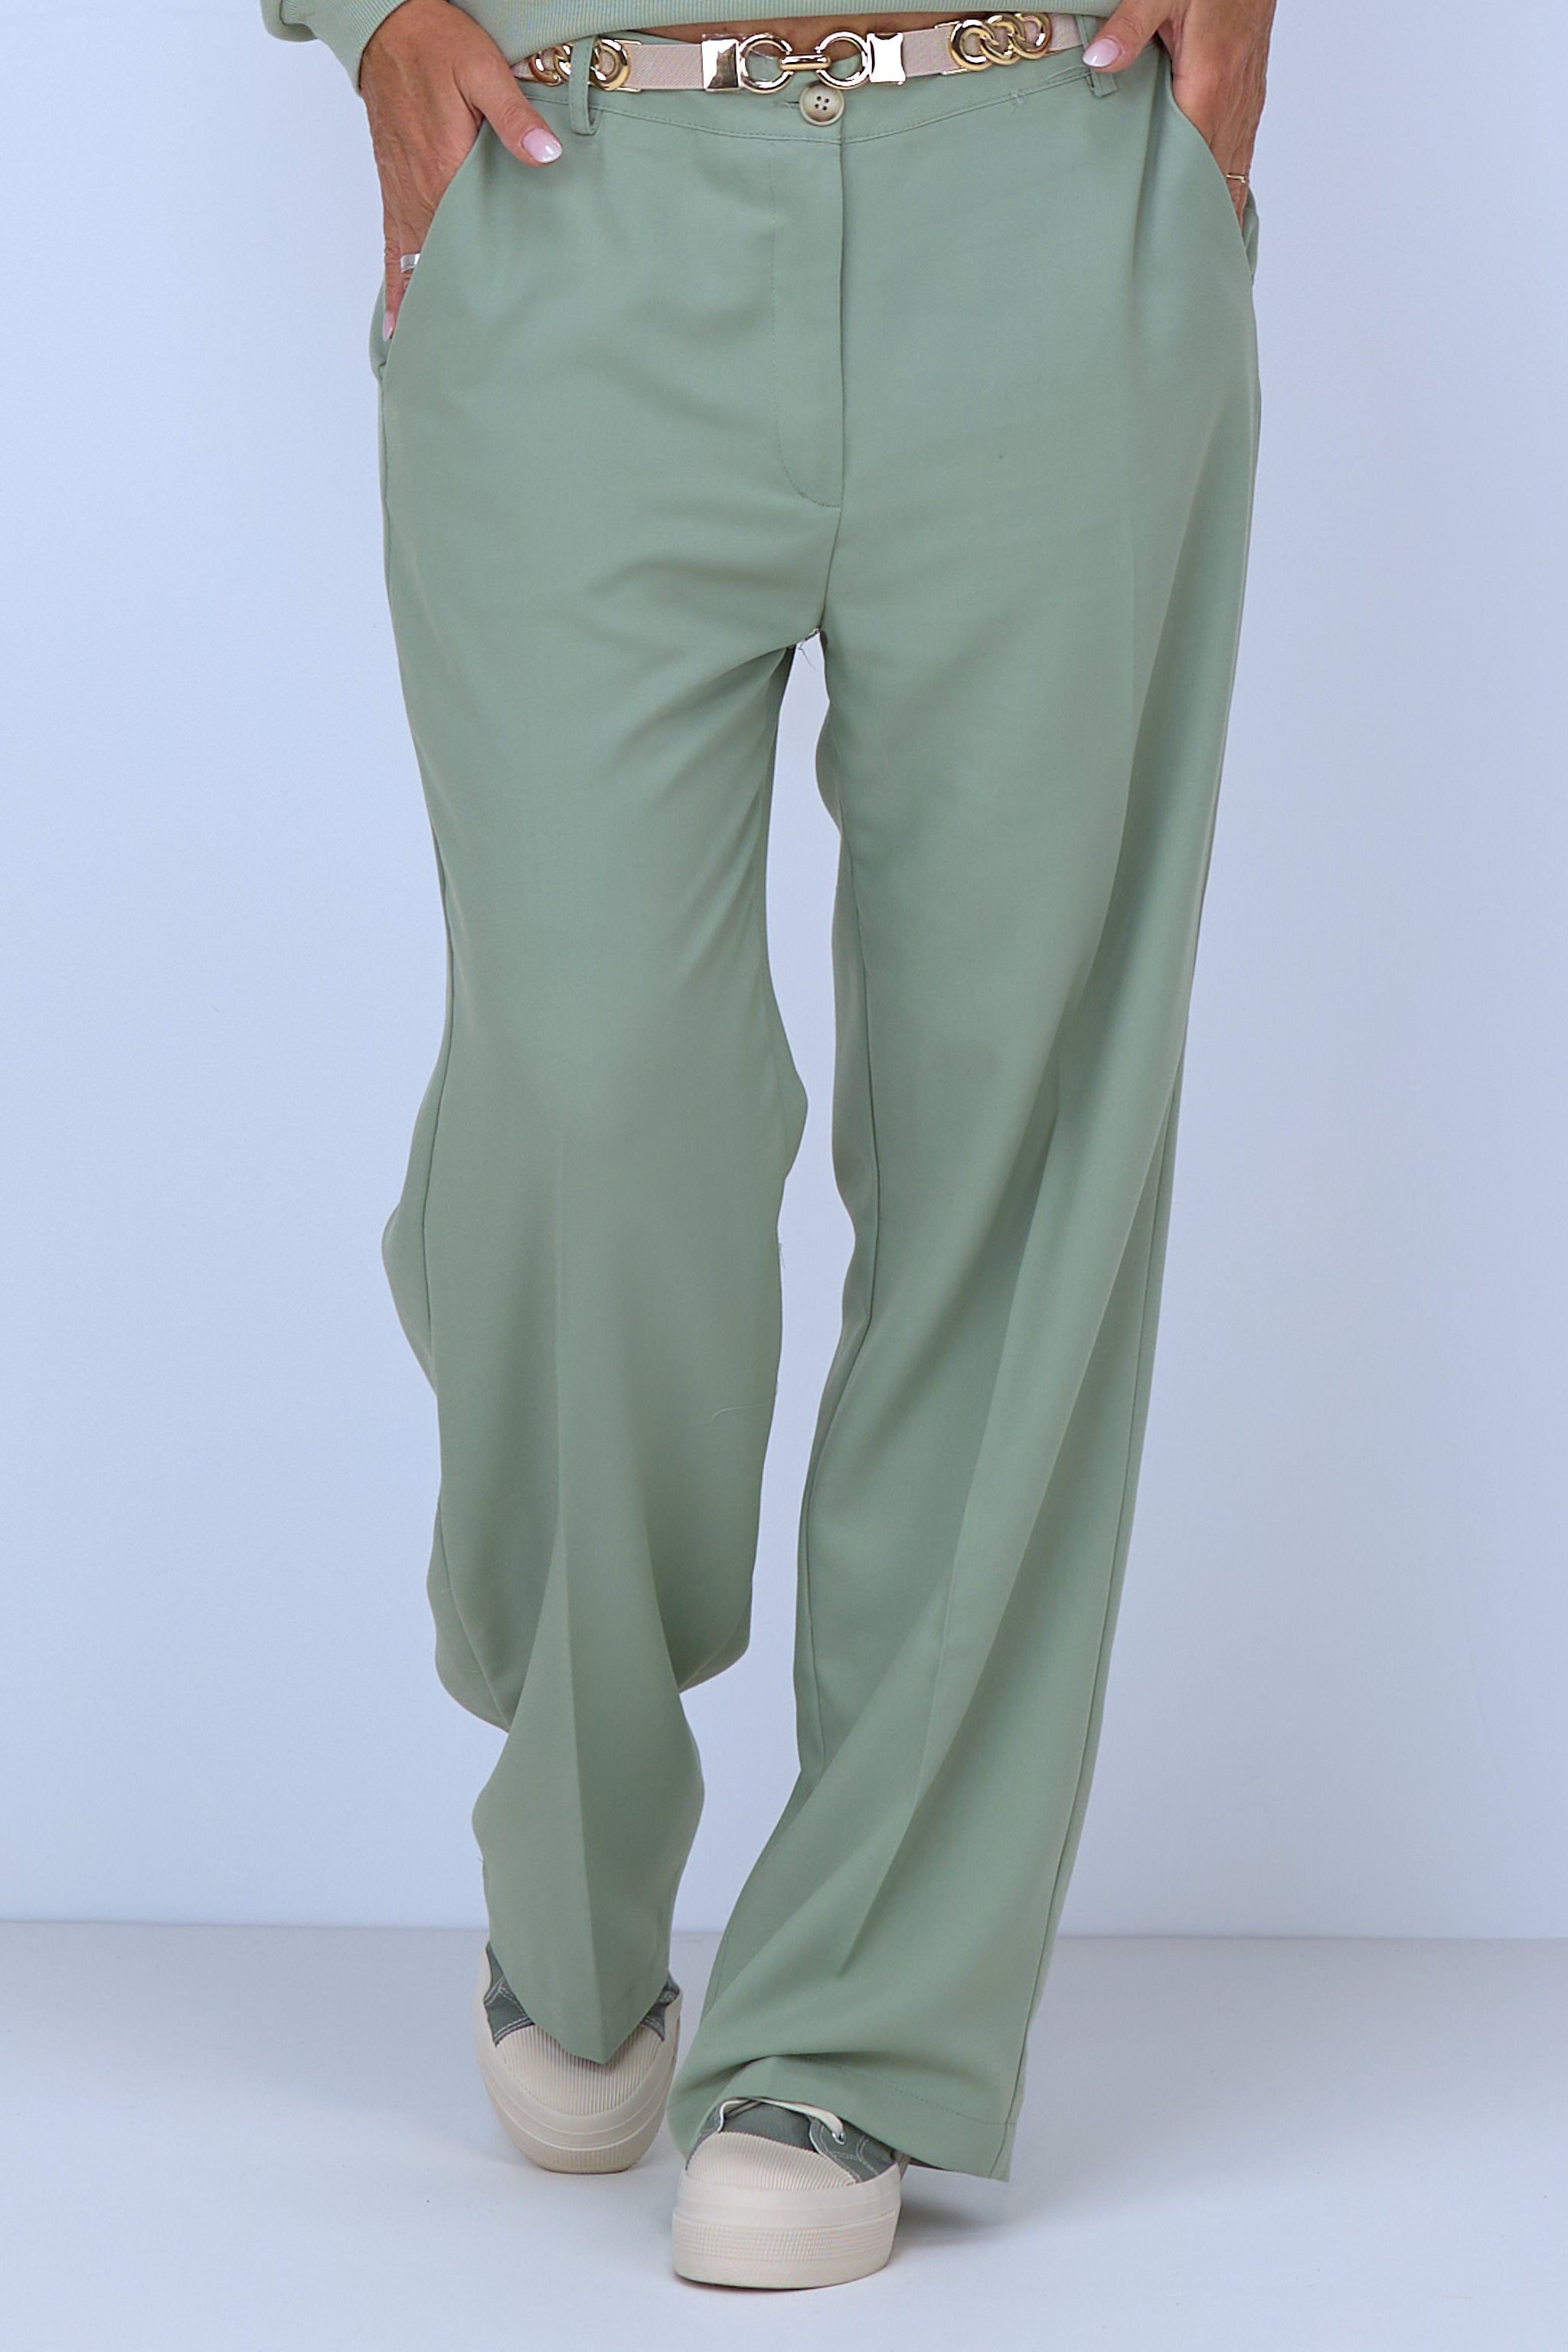 Fabric pants in Marlene style with pressed creases, lime green